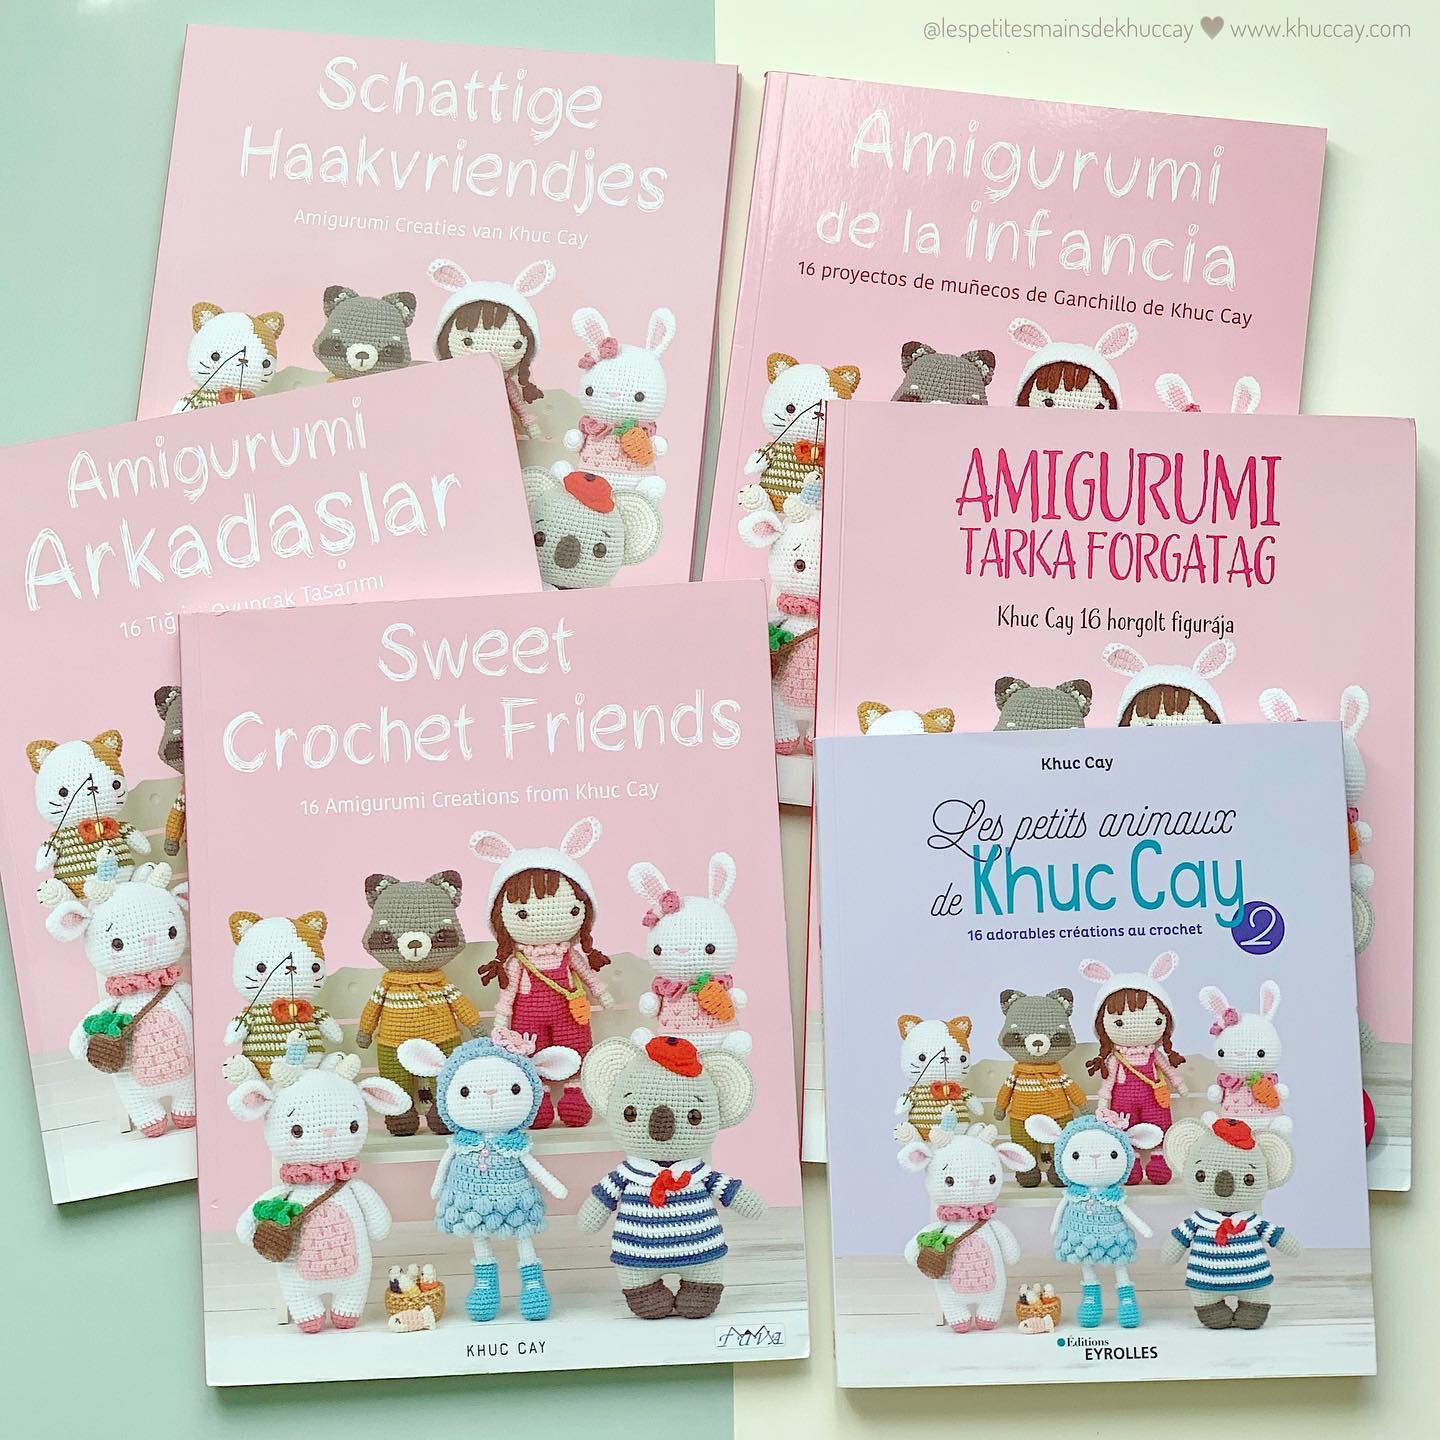 My first book “Sweet Crochet Friends” is available in different languages : English, Spanish, French, Dutch, Turkish, Hungarian 💜
* German version is released recently and I can’t wait to receive it! 
Happy Sunday my friends 😊